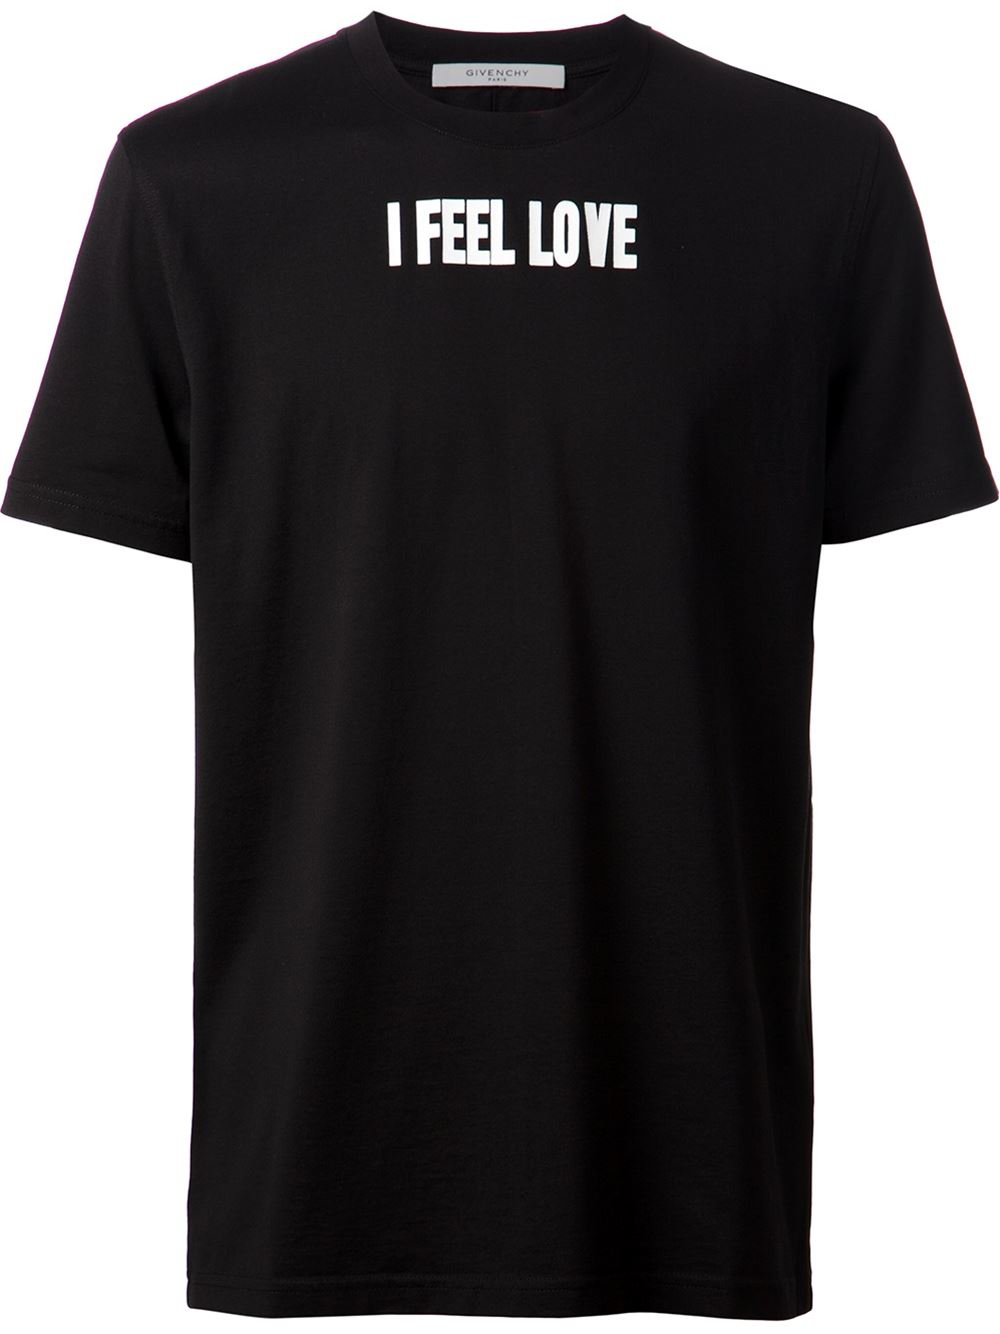 Lyst - Givenchy I Feel Love T-Shirt in Black for Men